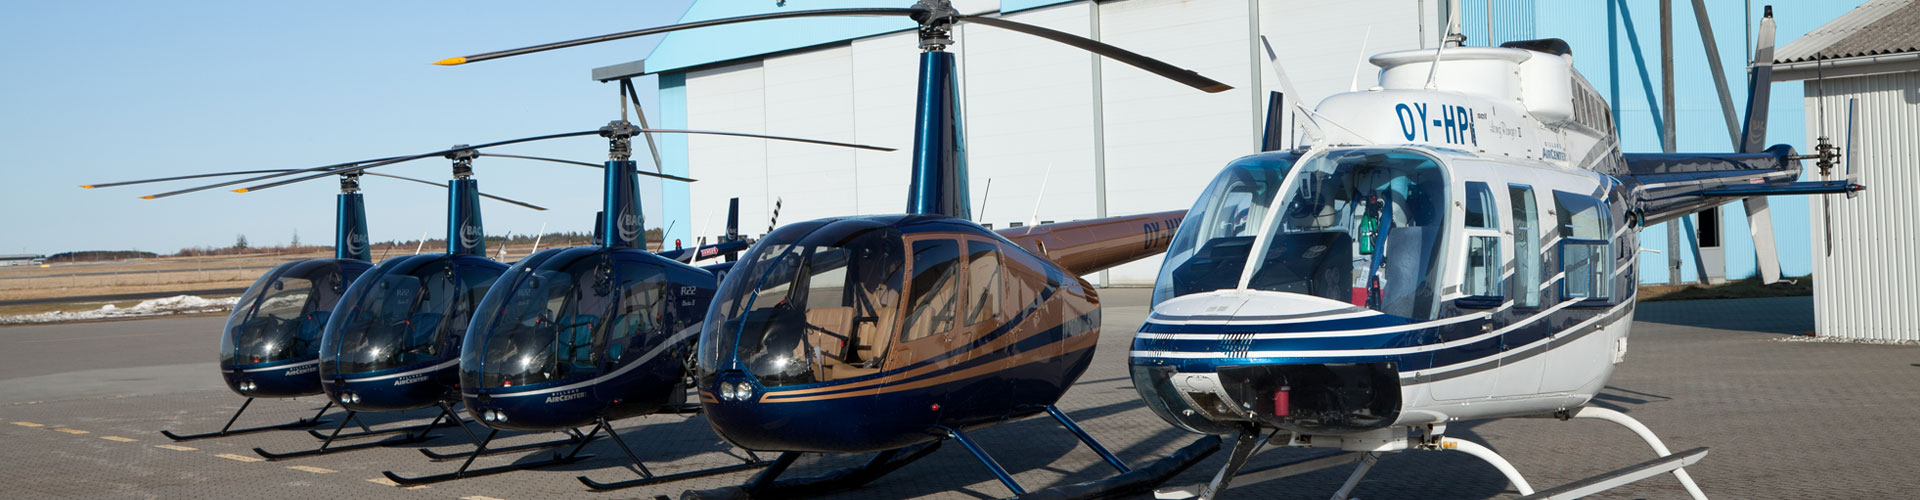 BAC_udlejning_heli_topbanner_1920x500